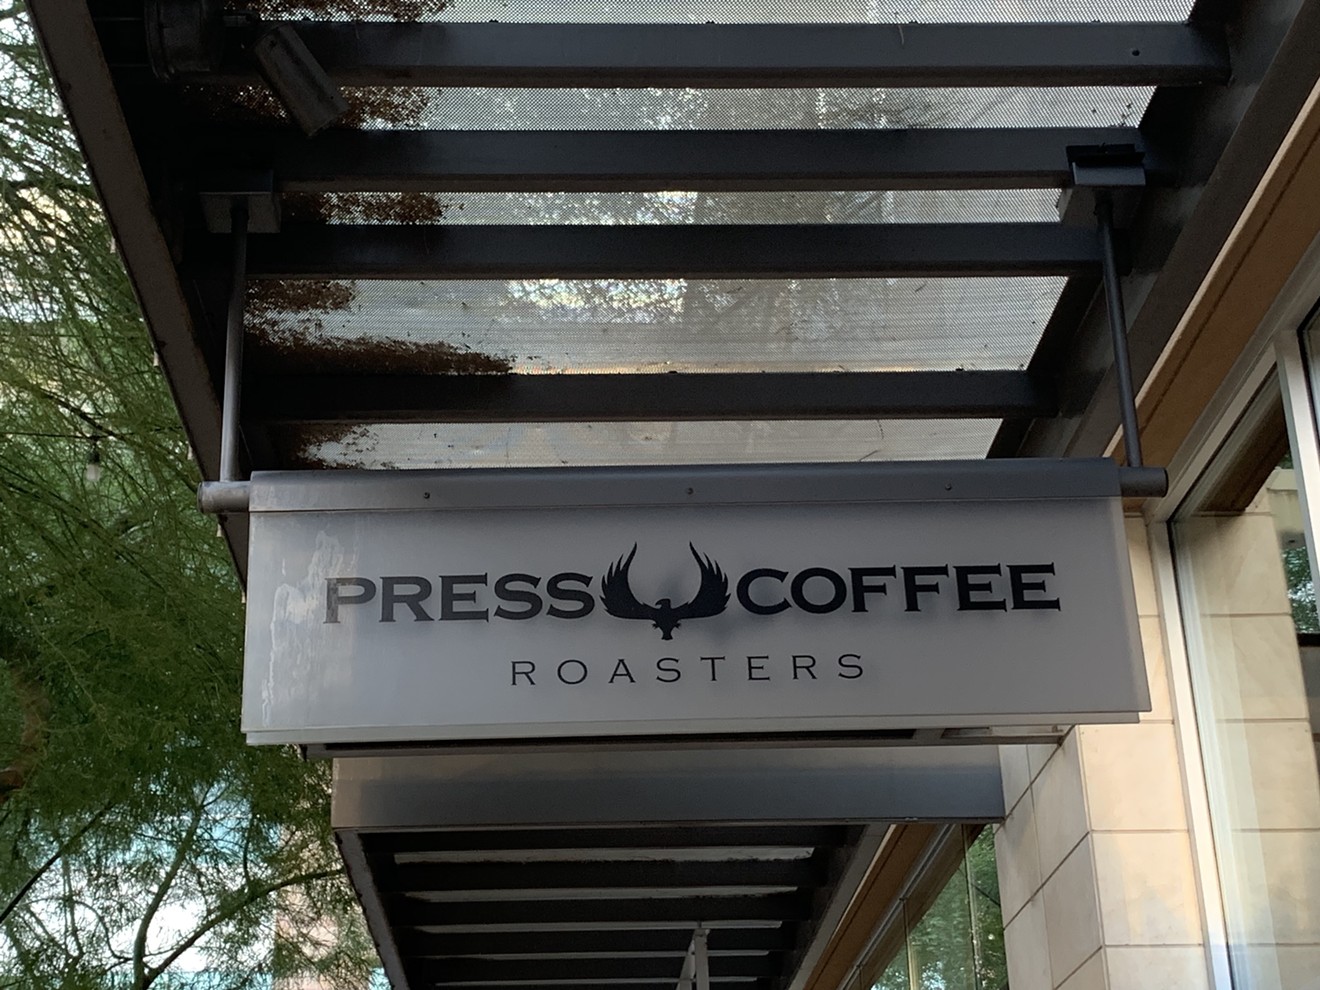 Press Coffee is great for a last minute business meeting or a quick coffee with a friend.